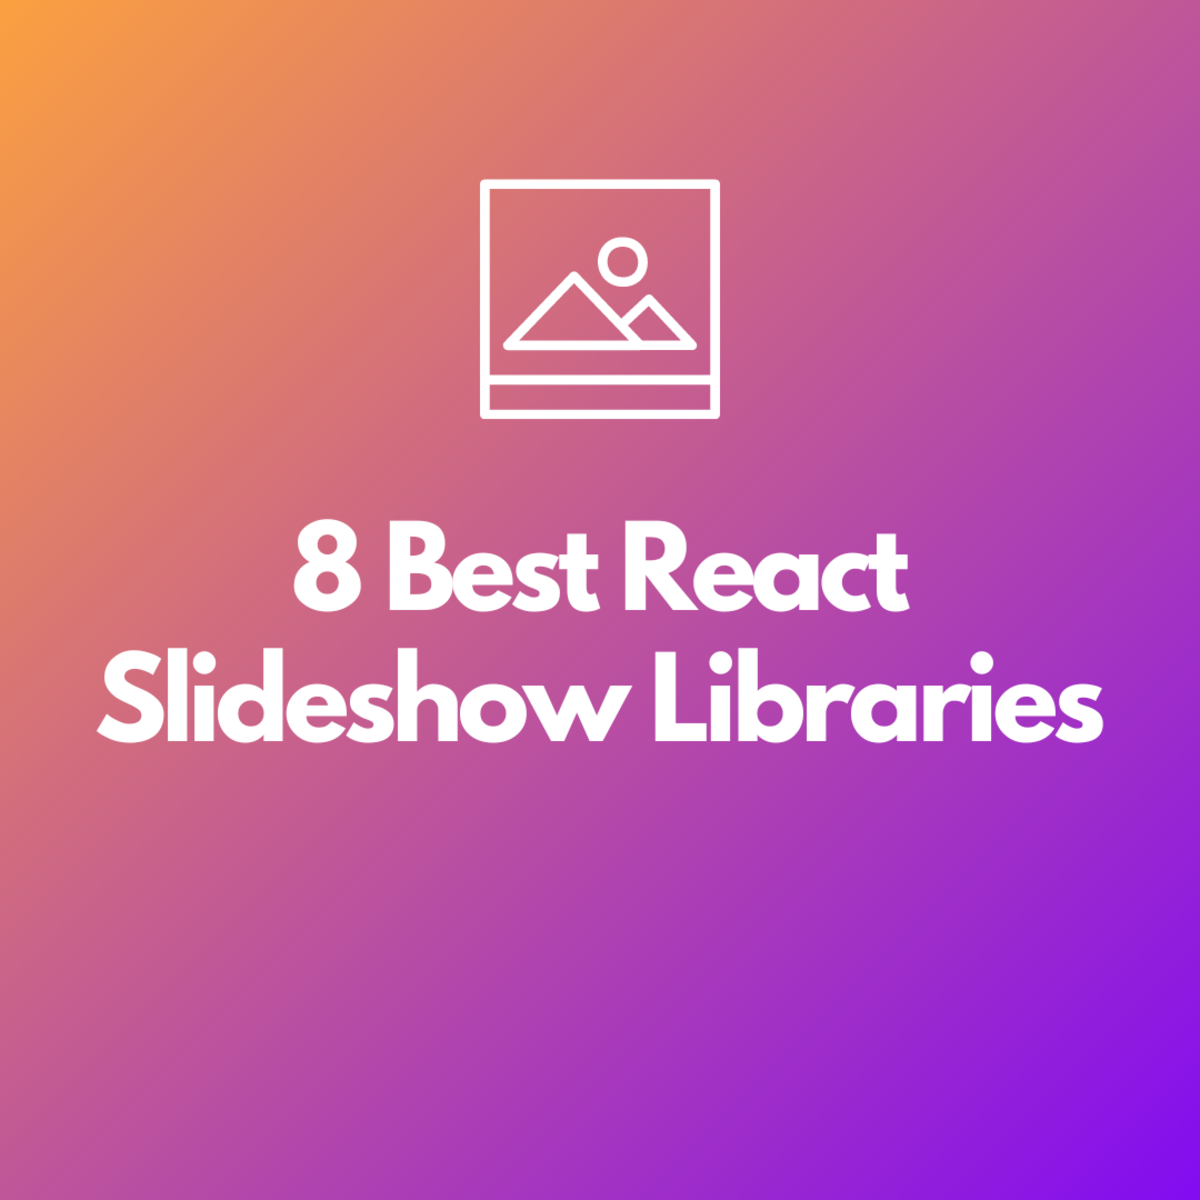 In this guide, we'll be taking a look at the best React slideshow libraries and components!